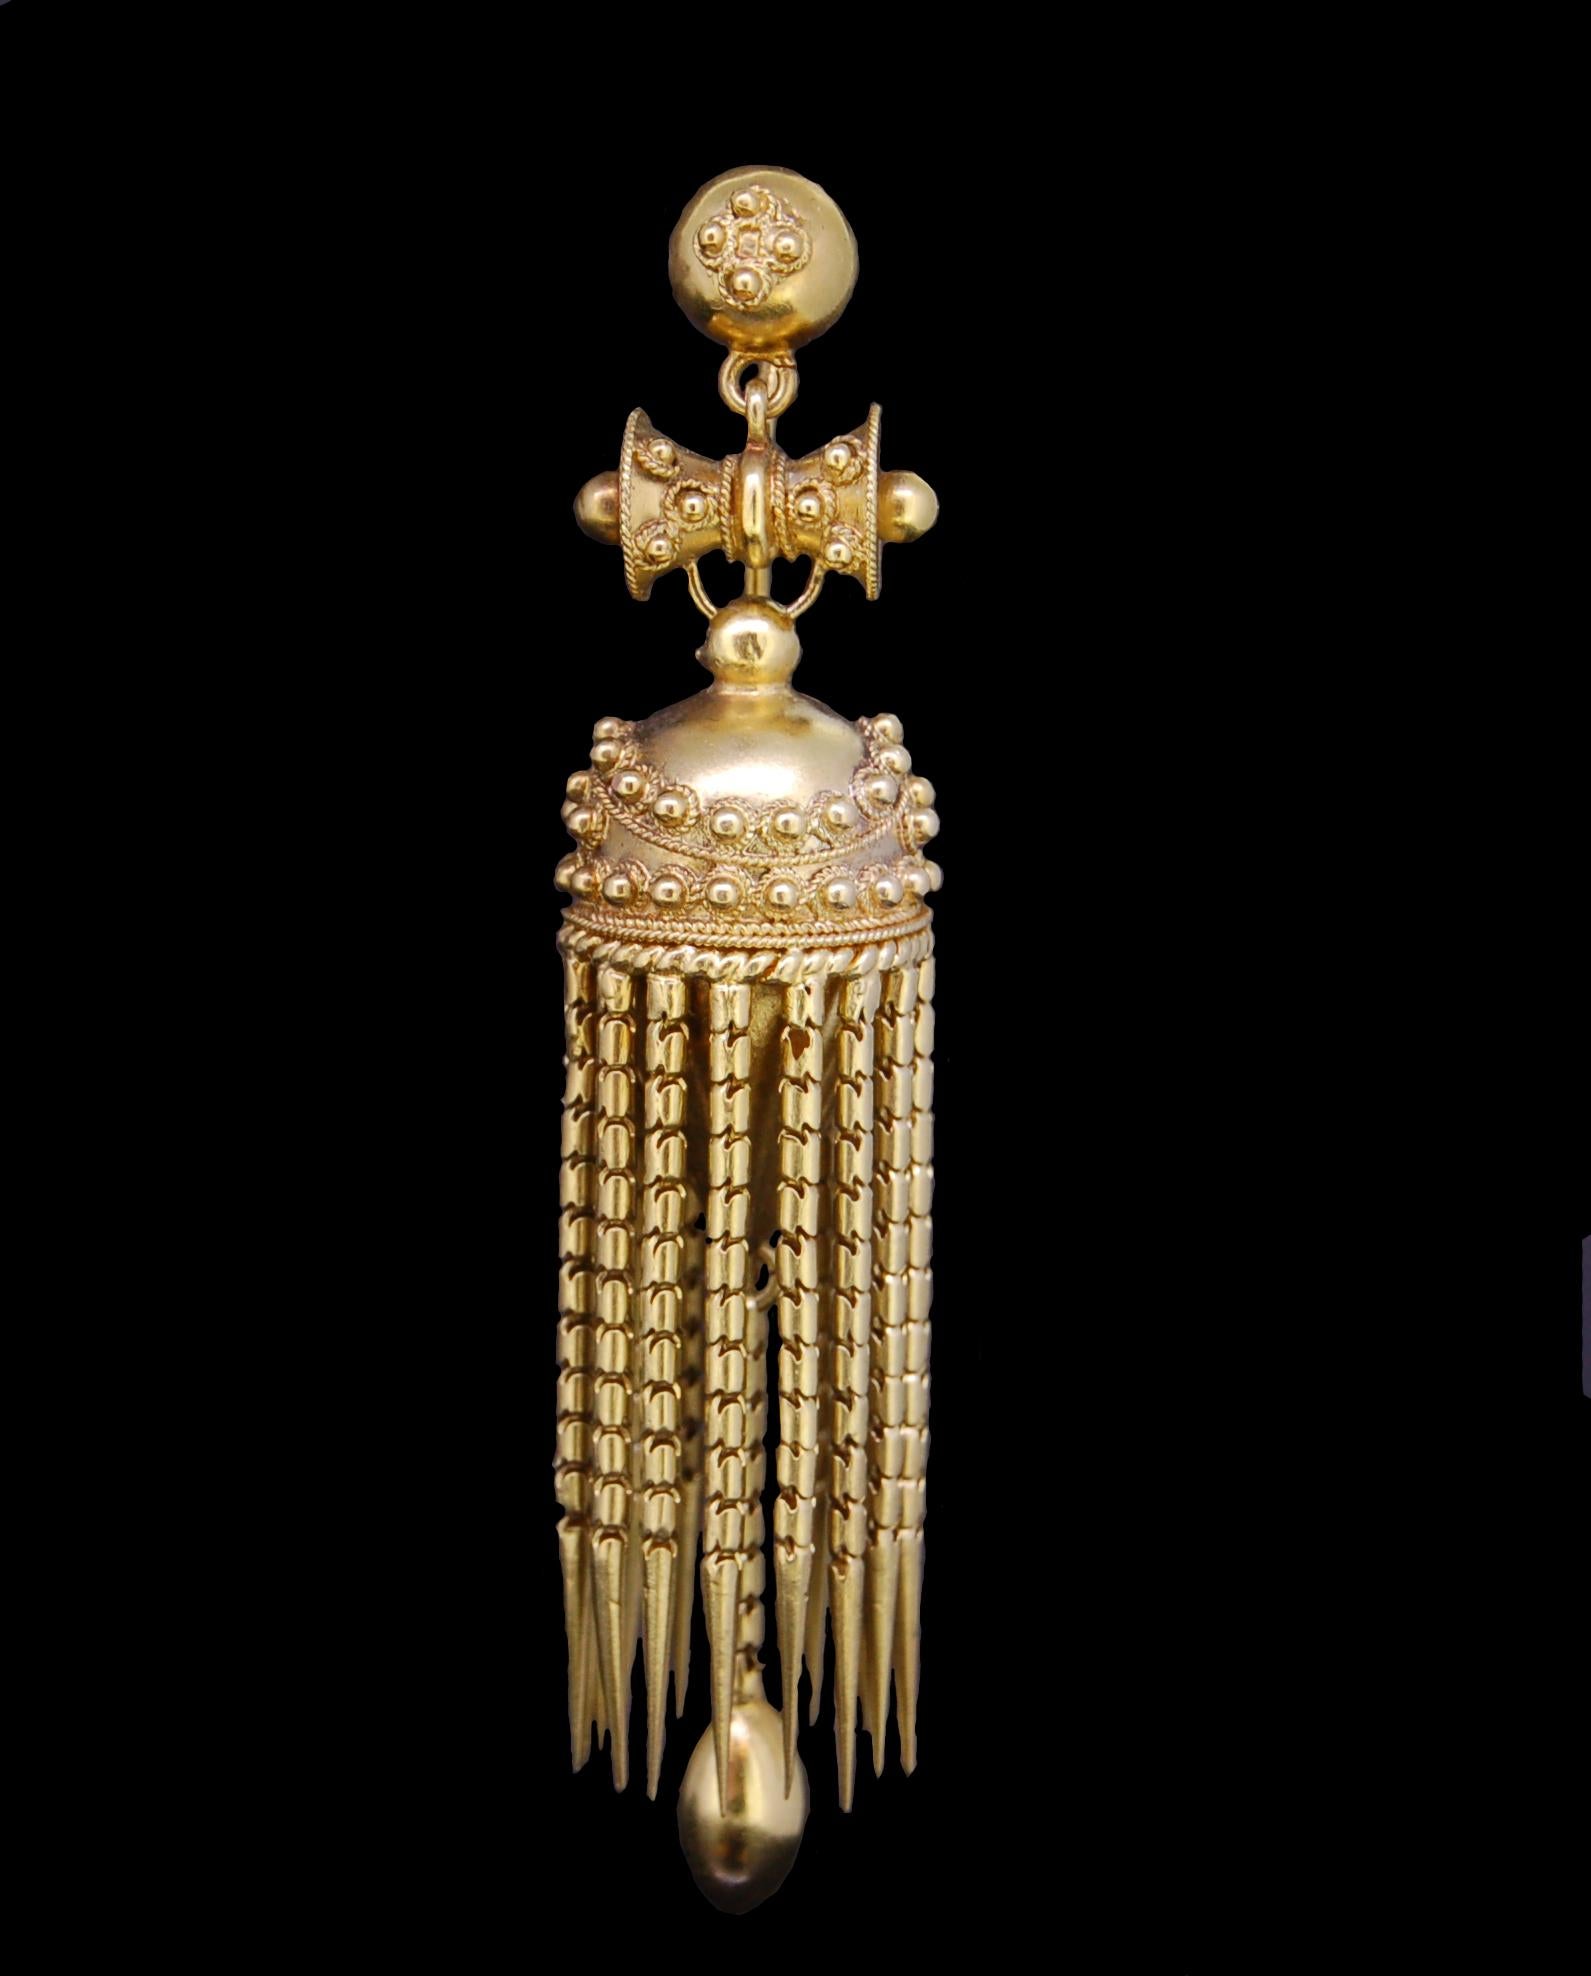 A PAIR OF ETRUSCAN STYLE PENDENT EARRINGS, CIRCA 1870, Each torpedo-shaped drop applied with bead and ropework details, issuing a fringe of snake-link tassels, to an articulated surmount. L. 6 cm. 14 grams. With a fitted case.